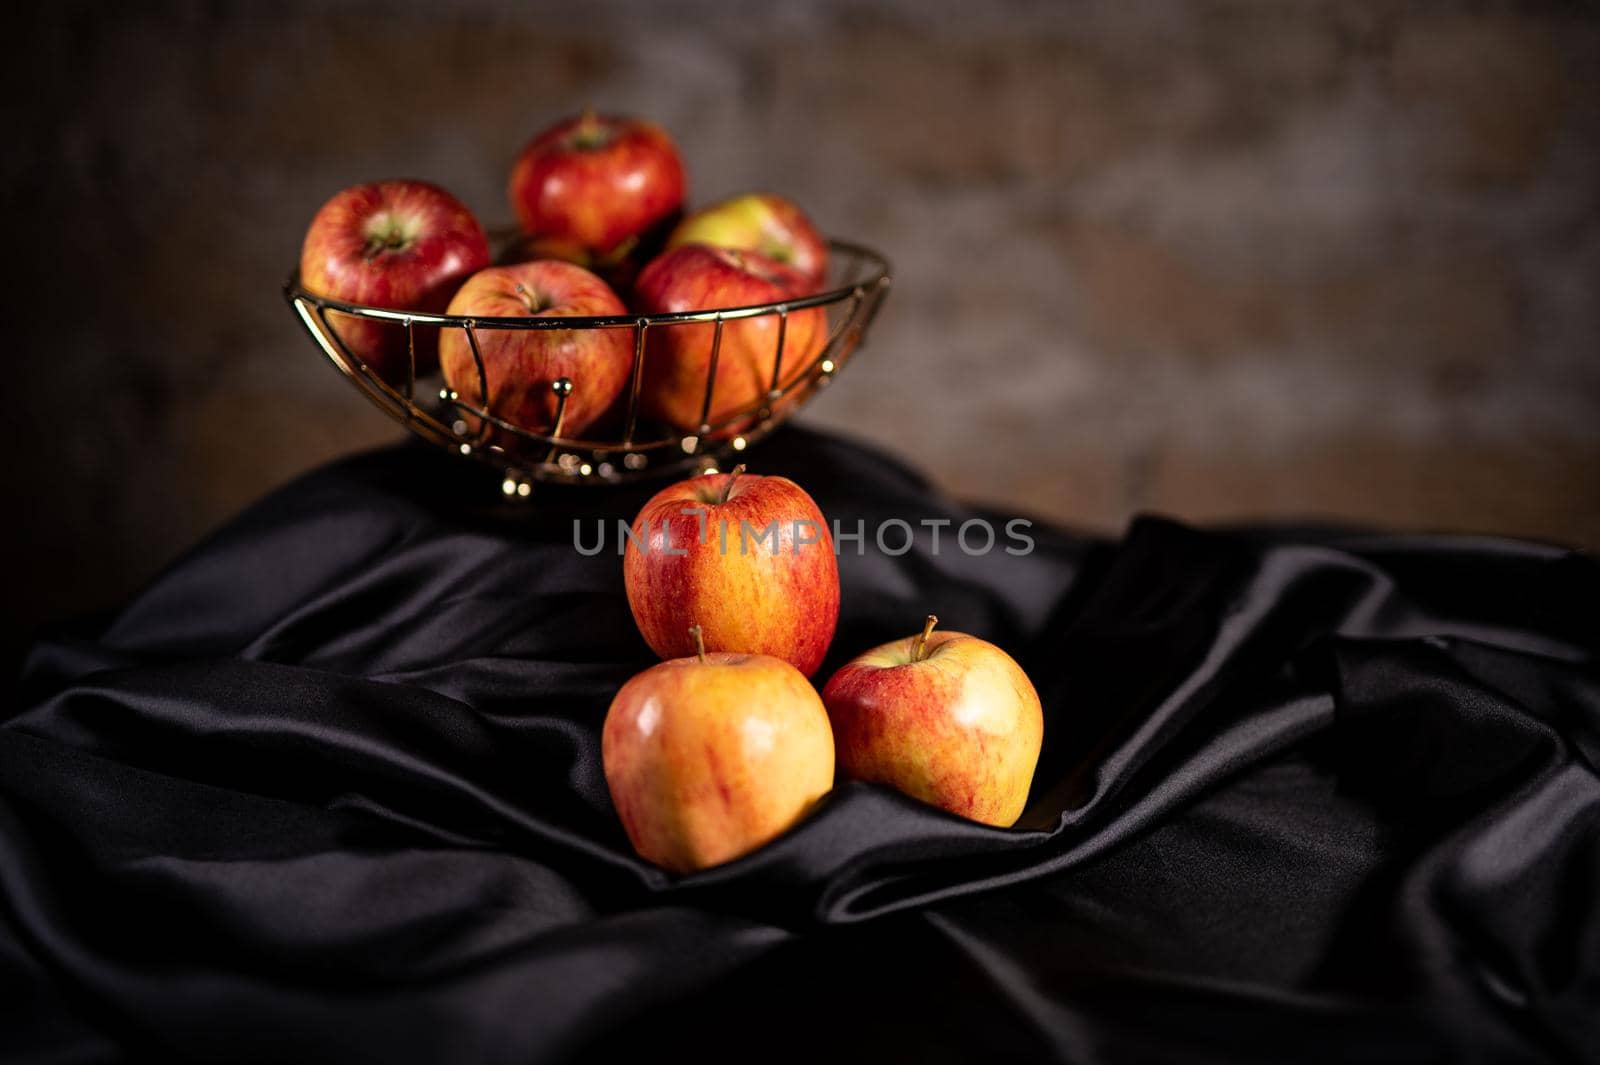 composition of red apples and black satin by carfedeph